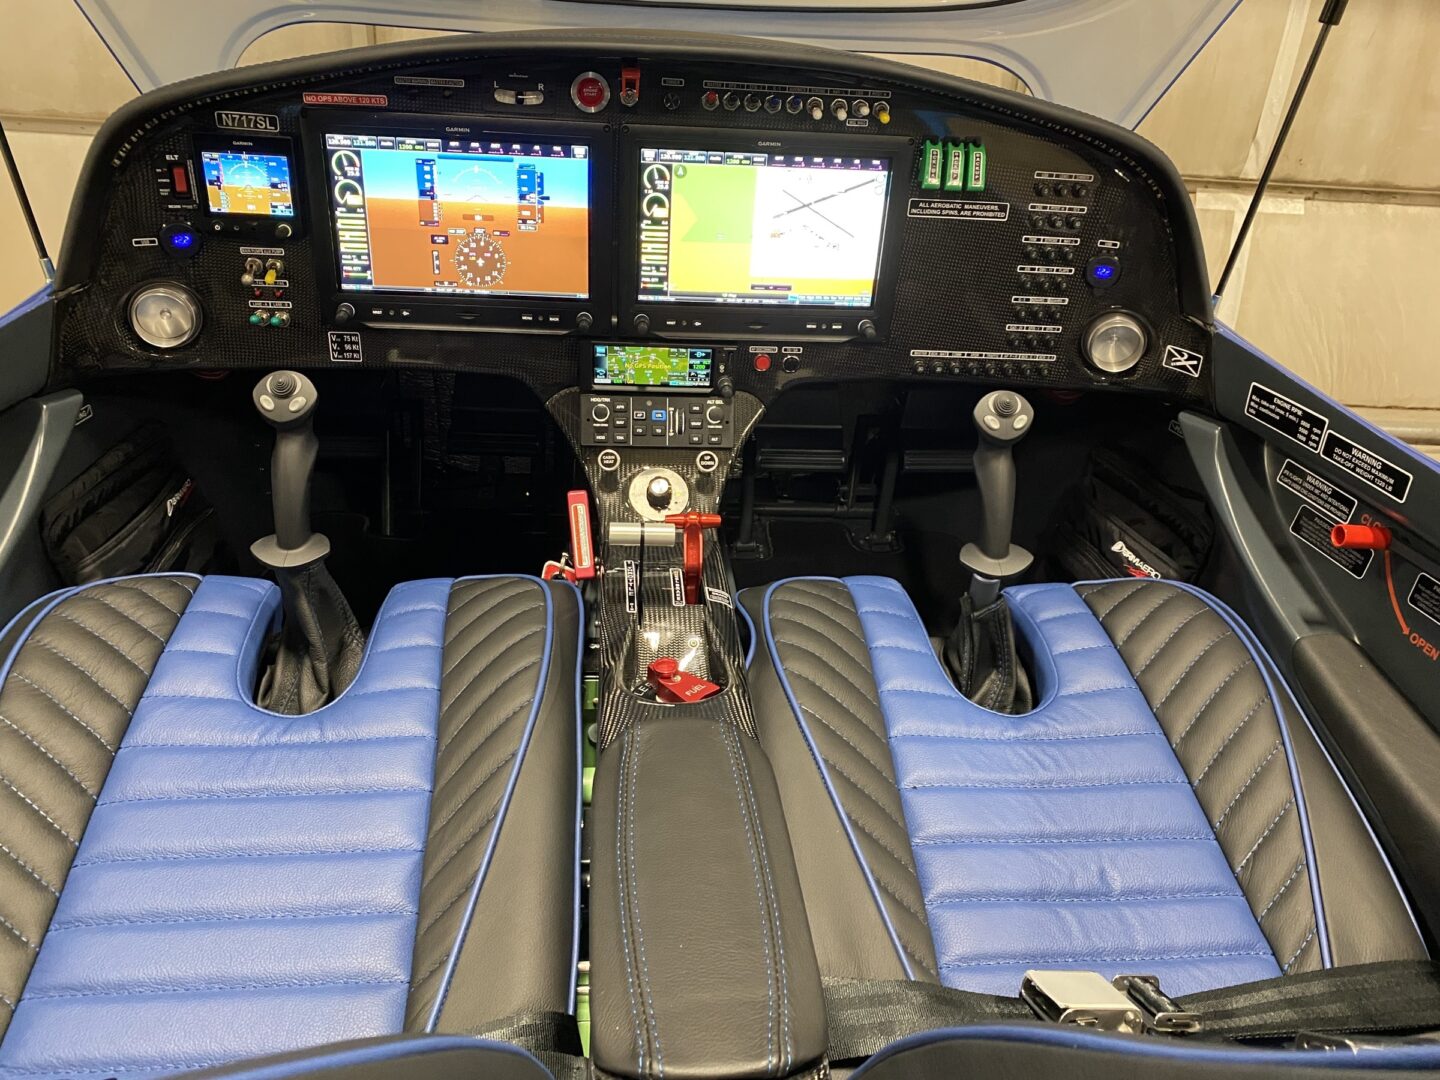 A view of the cockpit of an airplane.